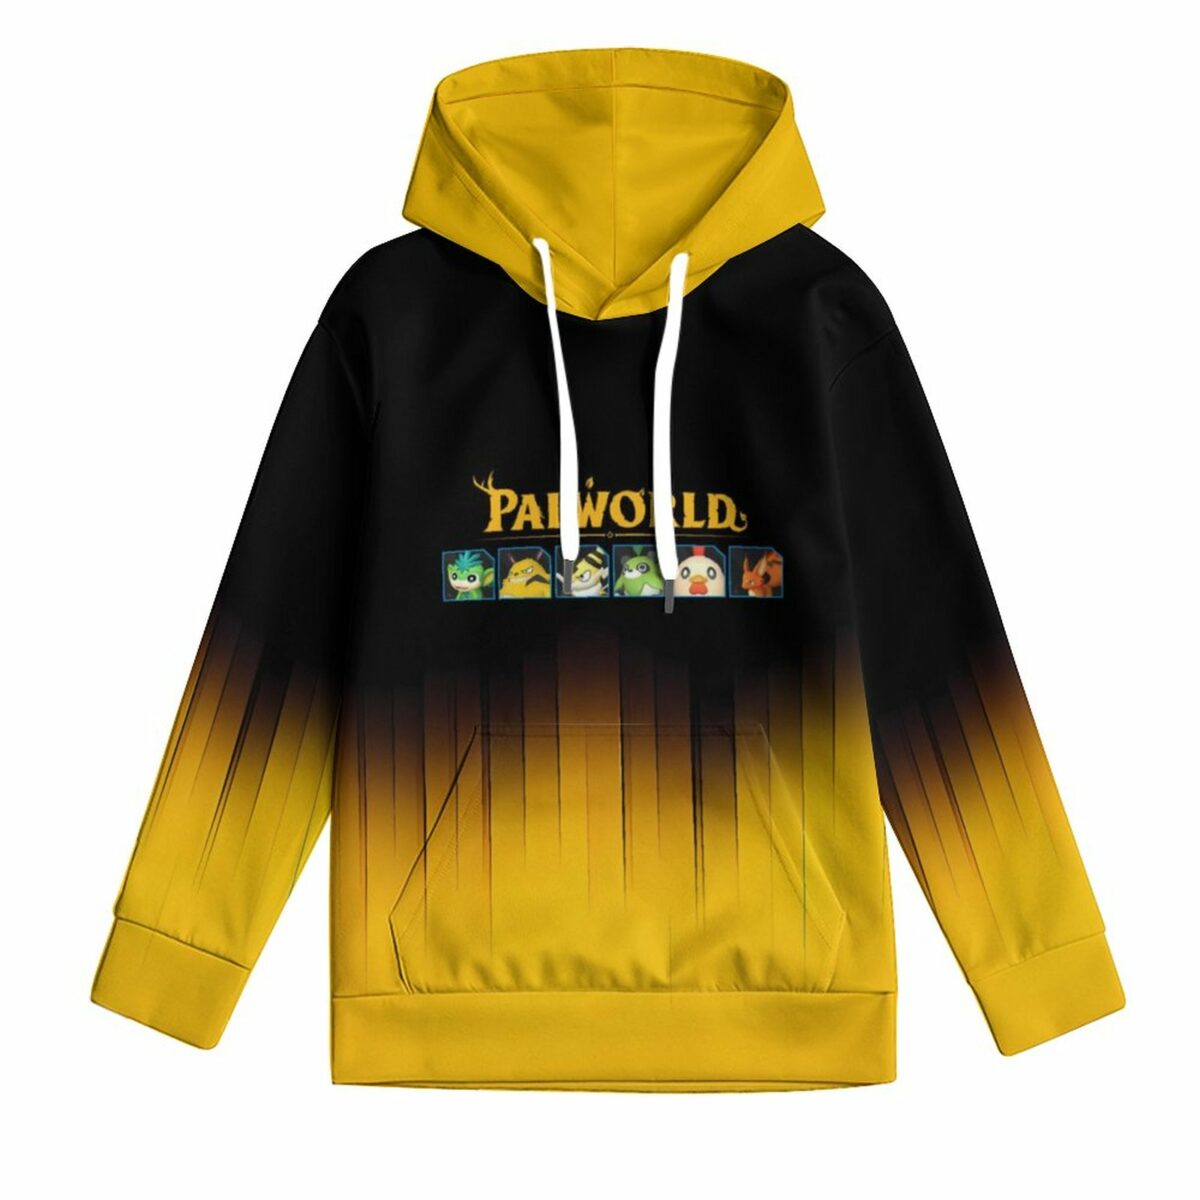 Palworld Black and Yellow 230gsm Hoodie for Kids (All-Over Printing) Cool Kiddo 10